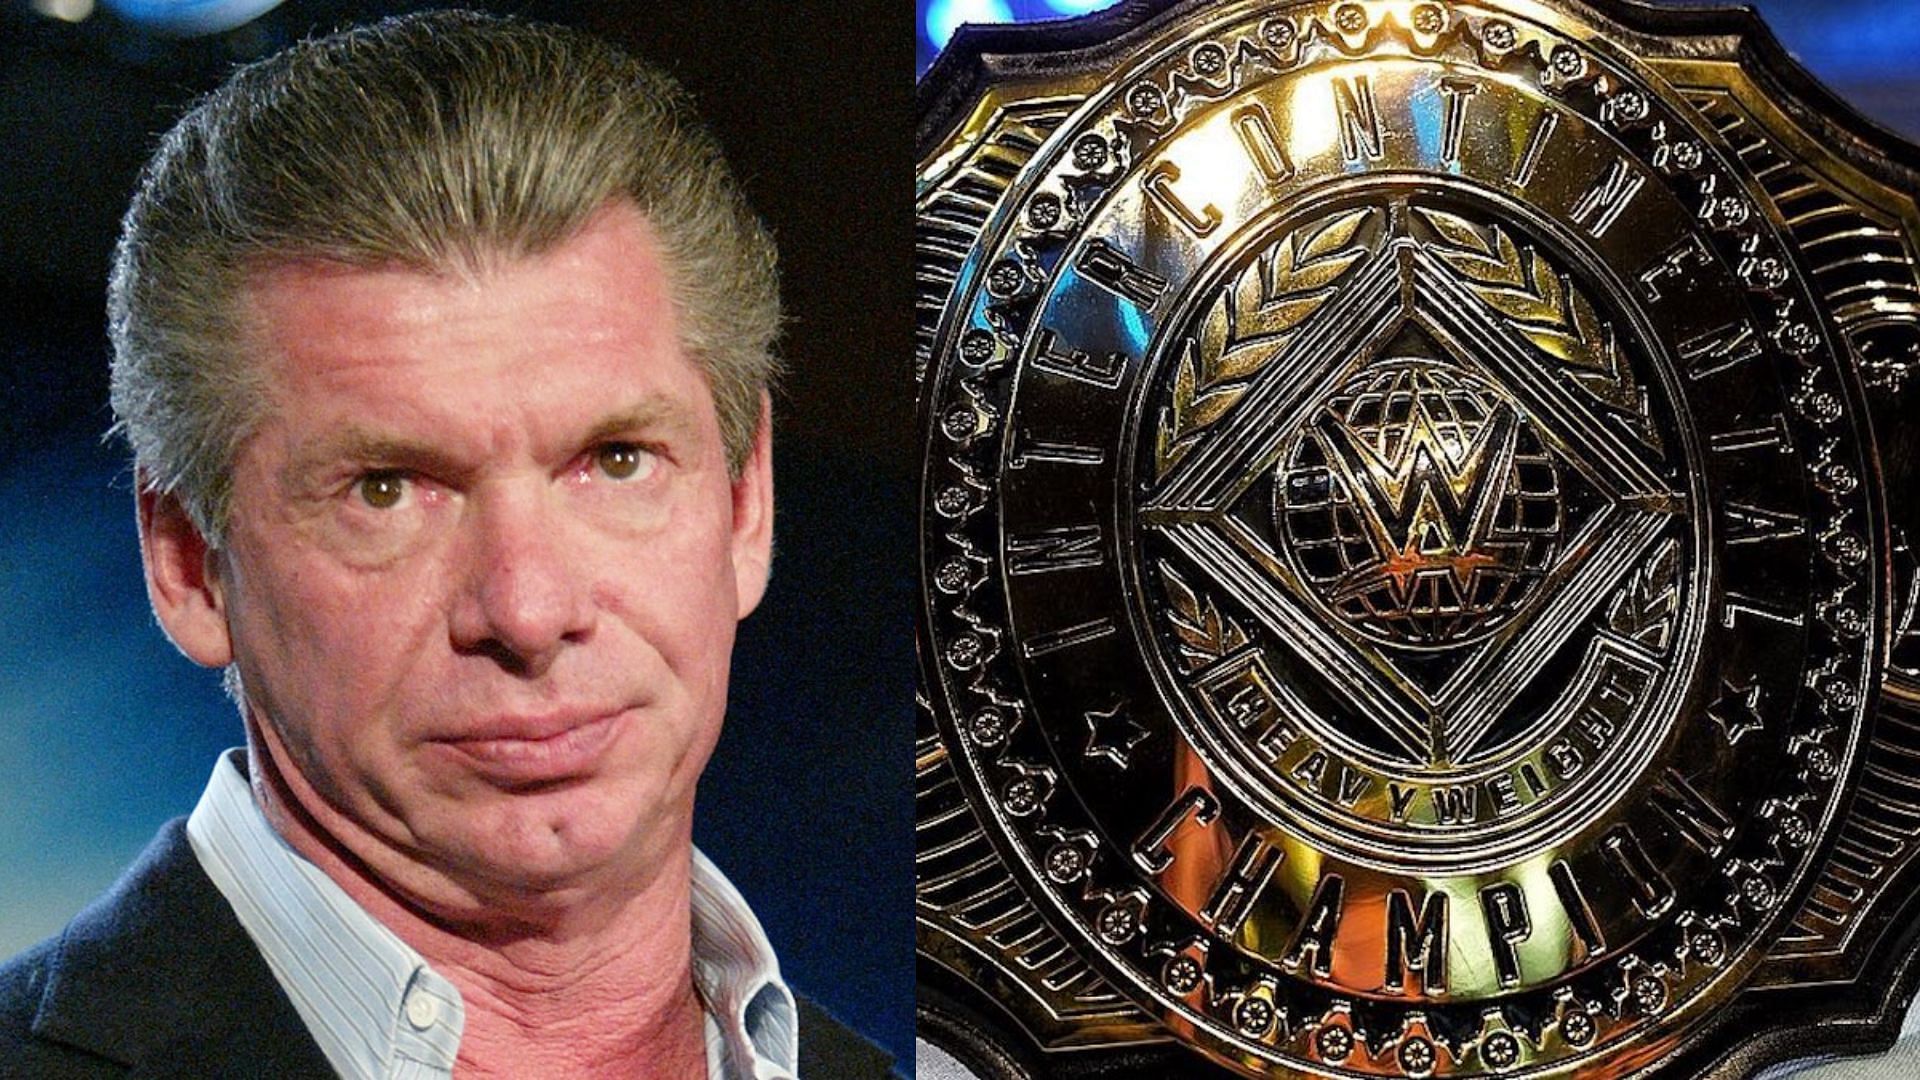 Vince McMahon (left) and the WWE Intercontinental Championship (right).